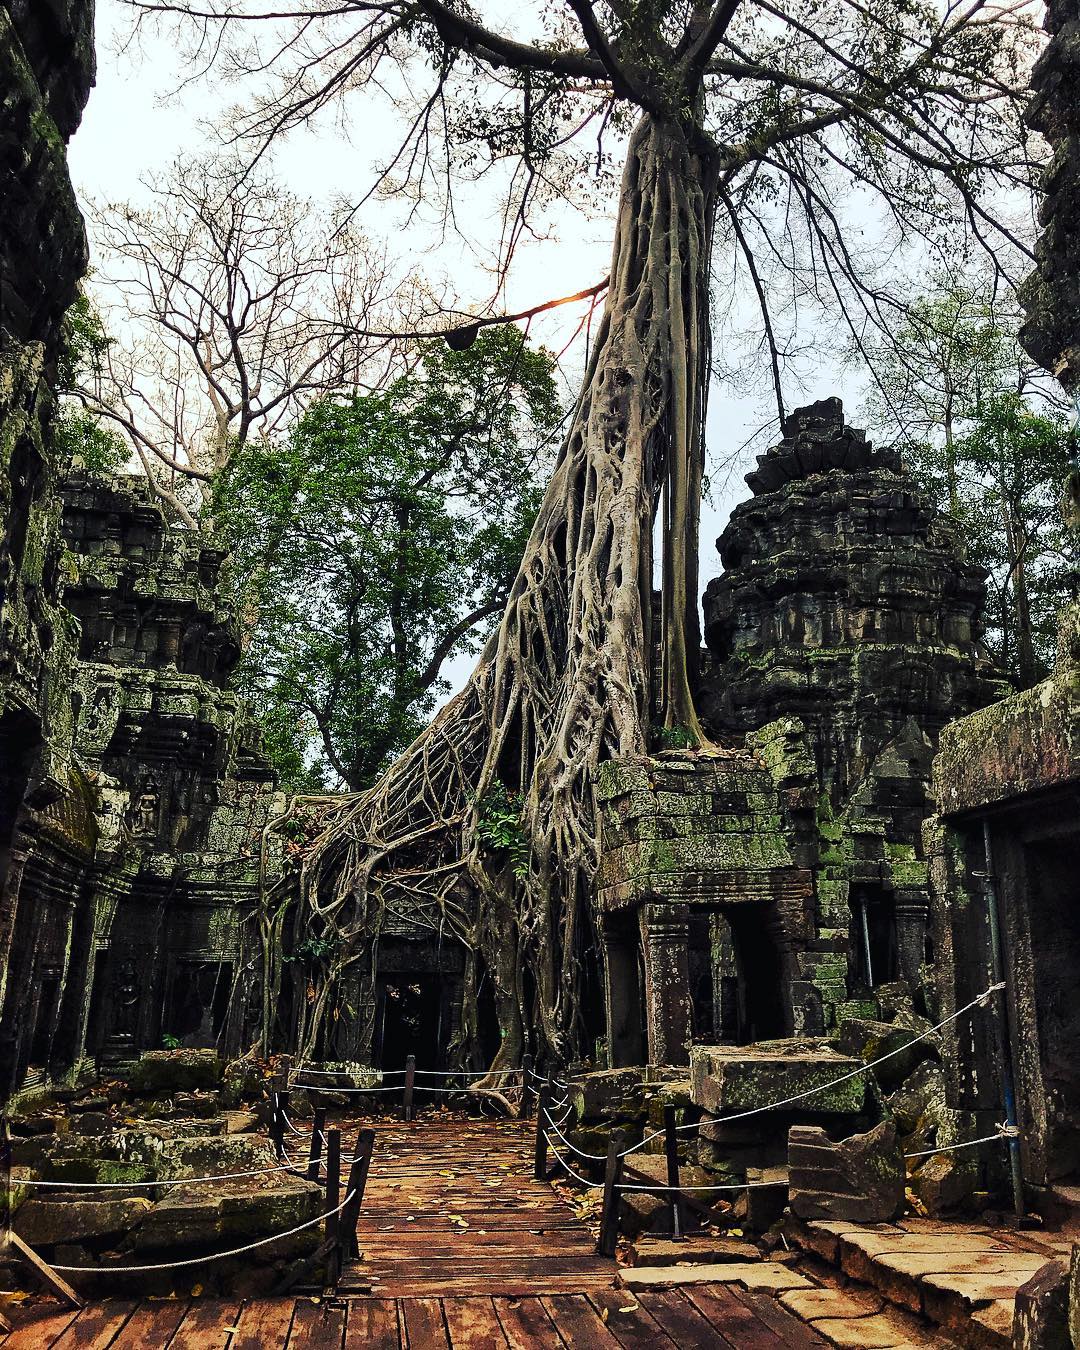 [Test] Watch the Sunrise Over Angkor Watt & X Other Things M'sians Should Have on Their Bucket List - WORLD OF BUZZ 13